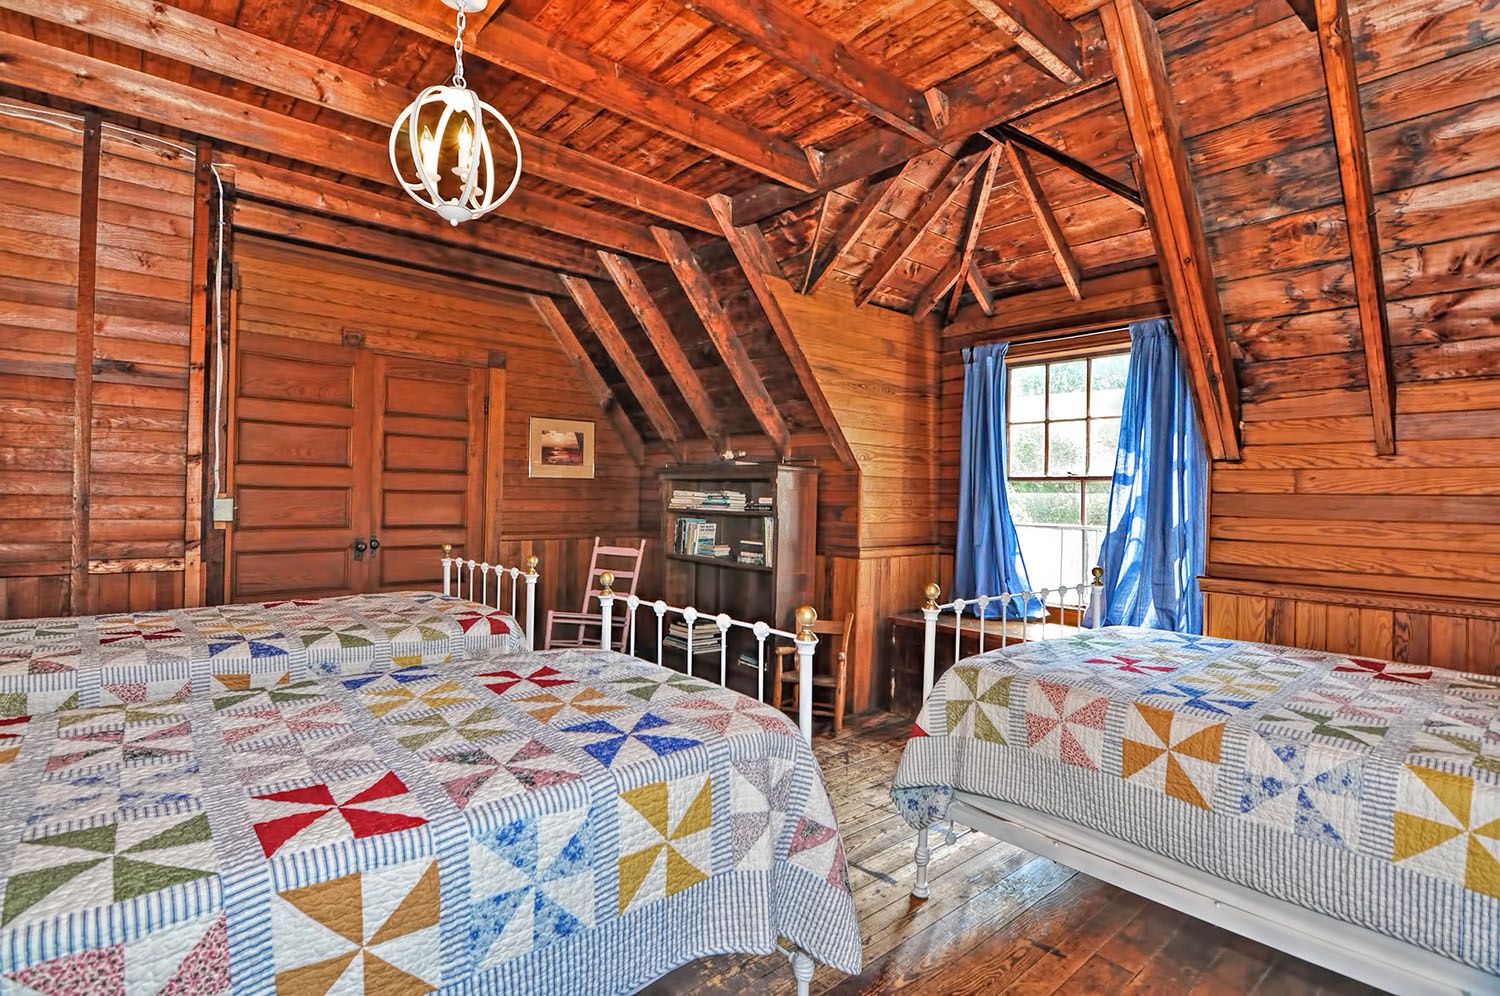 The Camp bedroom has a window seat with a view of the woods.